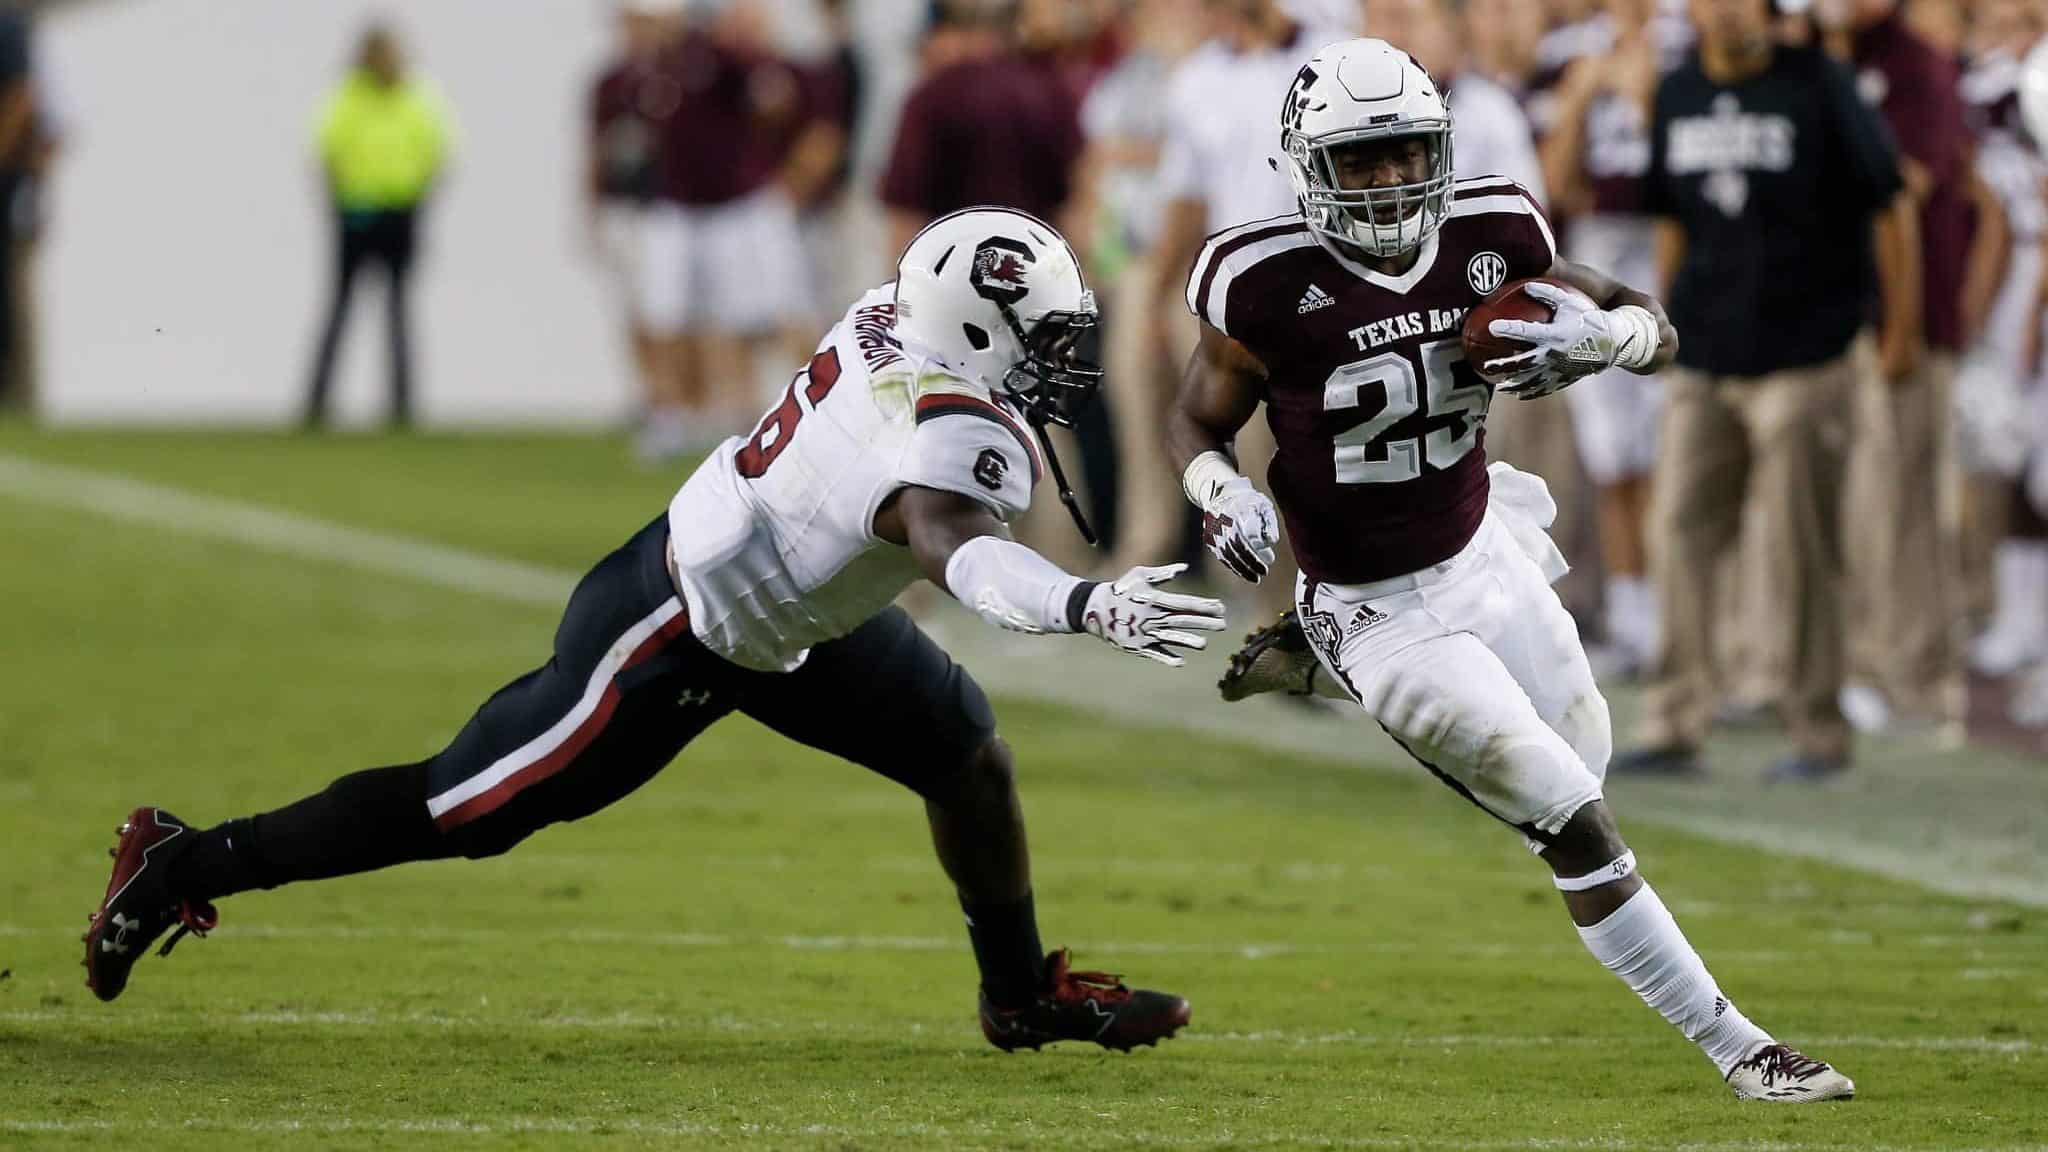 COLLEGE STATION, TX - SEPTEMBER 30: Kendall Bussey #25 of the Texas A&M Aggies rushes past T.J. Brunson #6 of the South Carolina Gamecocks at Kyle Field on September 30, 2017 in College Station, Texas.